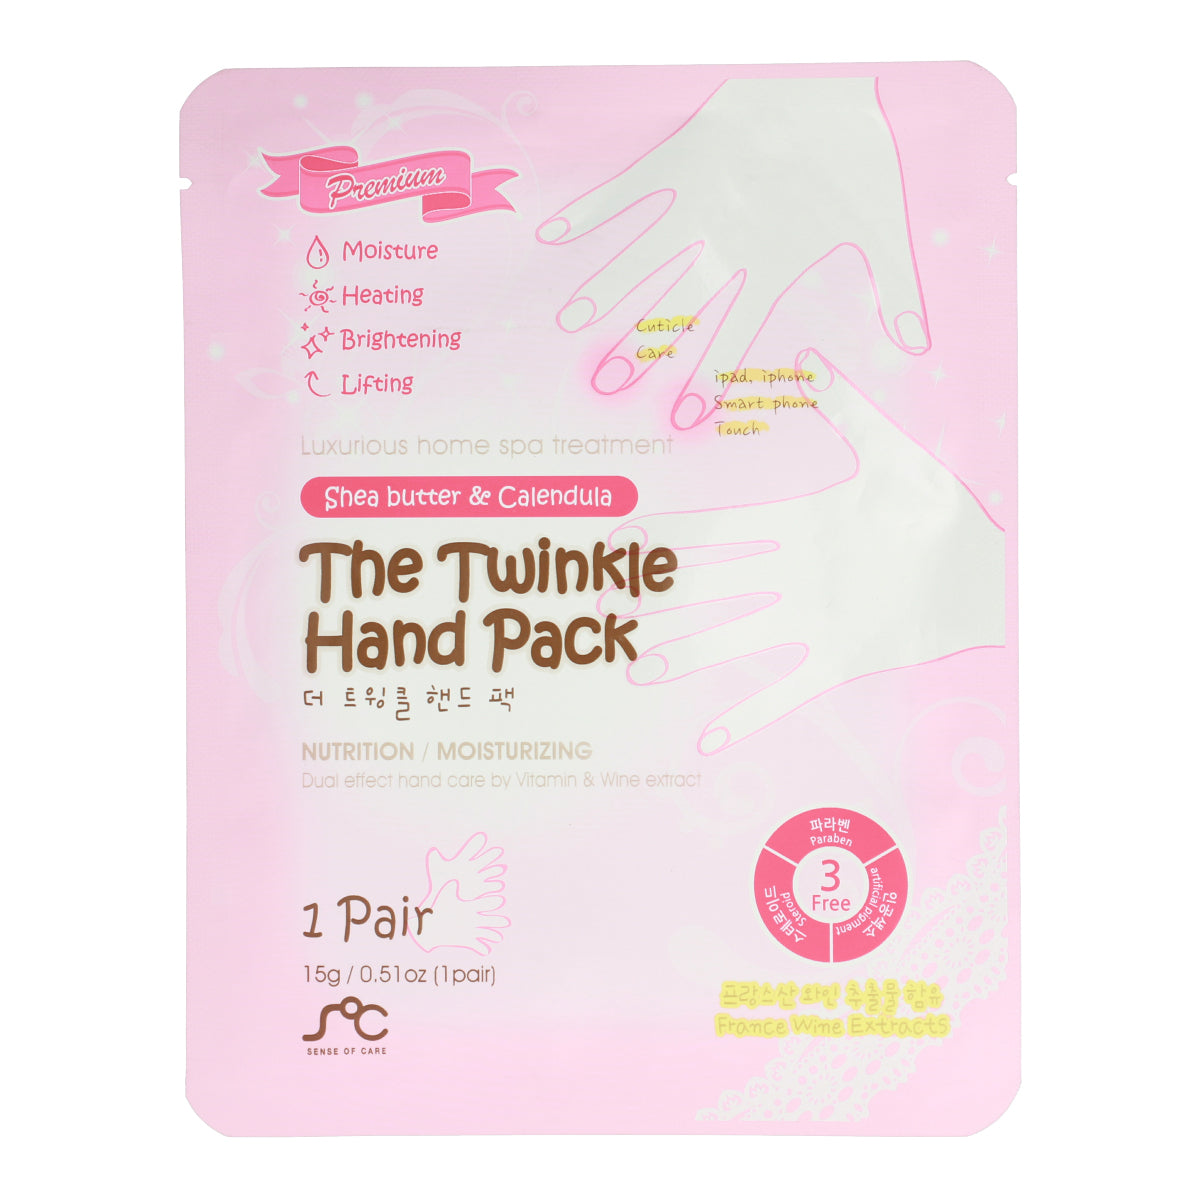 The Twinkle Hand Pack